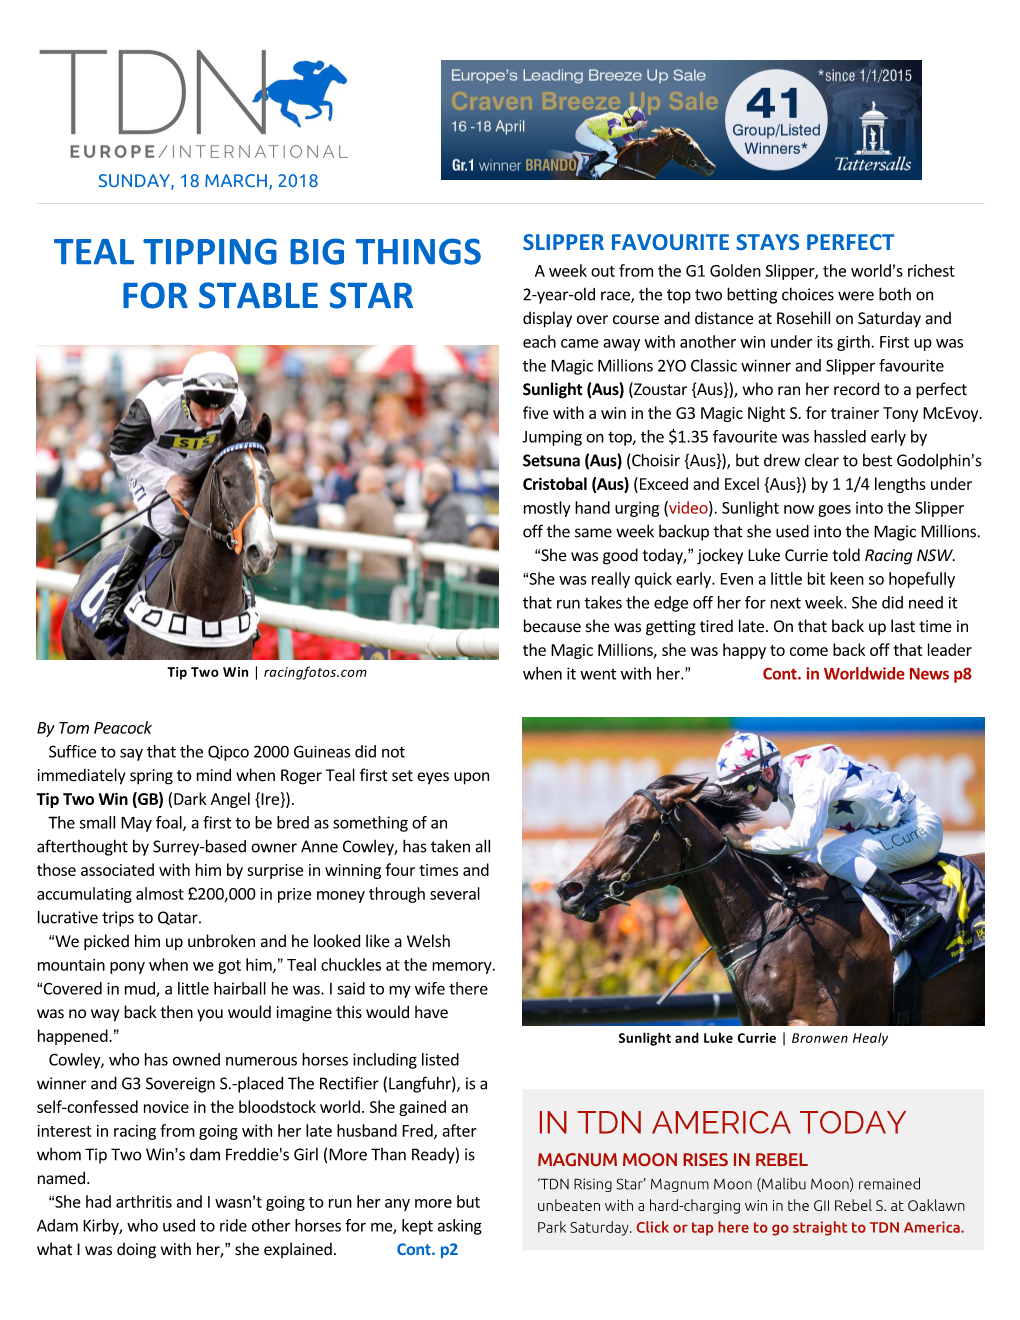 Teal Tipping Big Things for Stable Star Cont